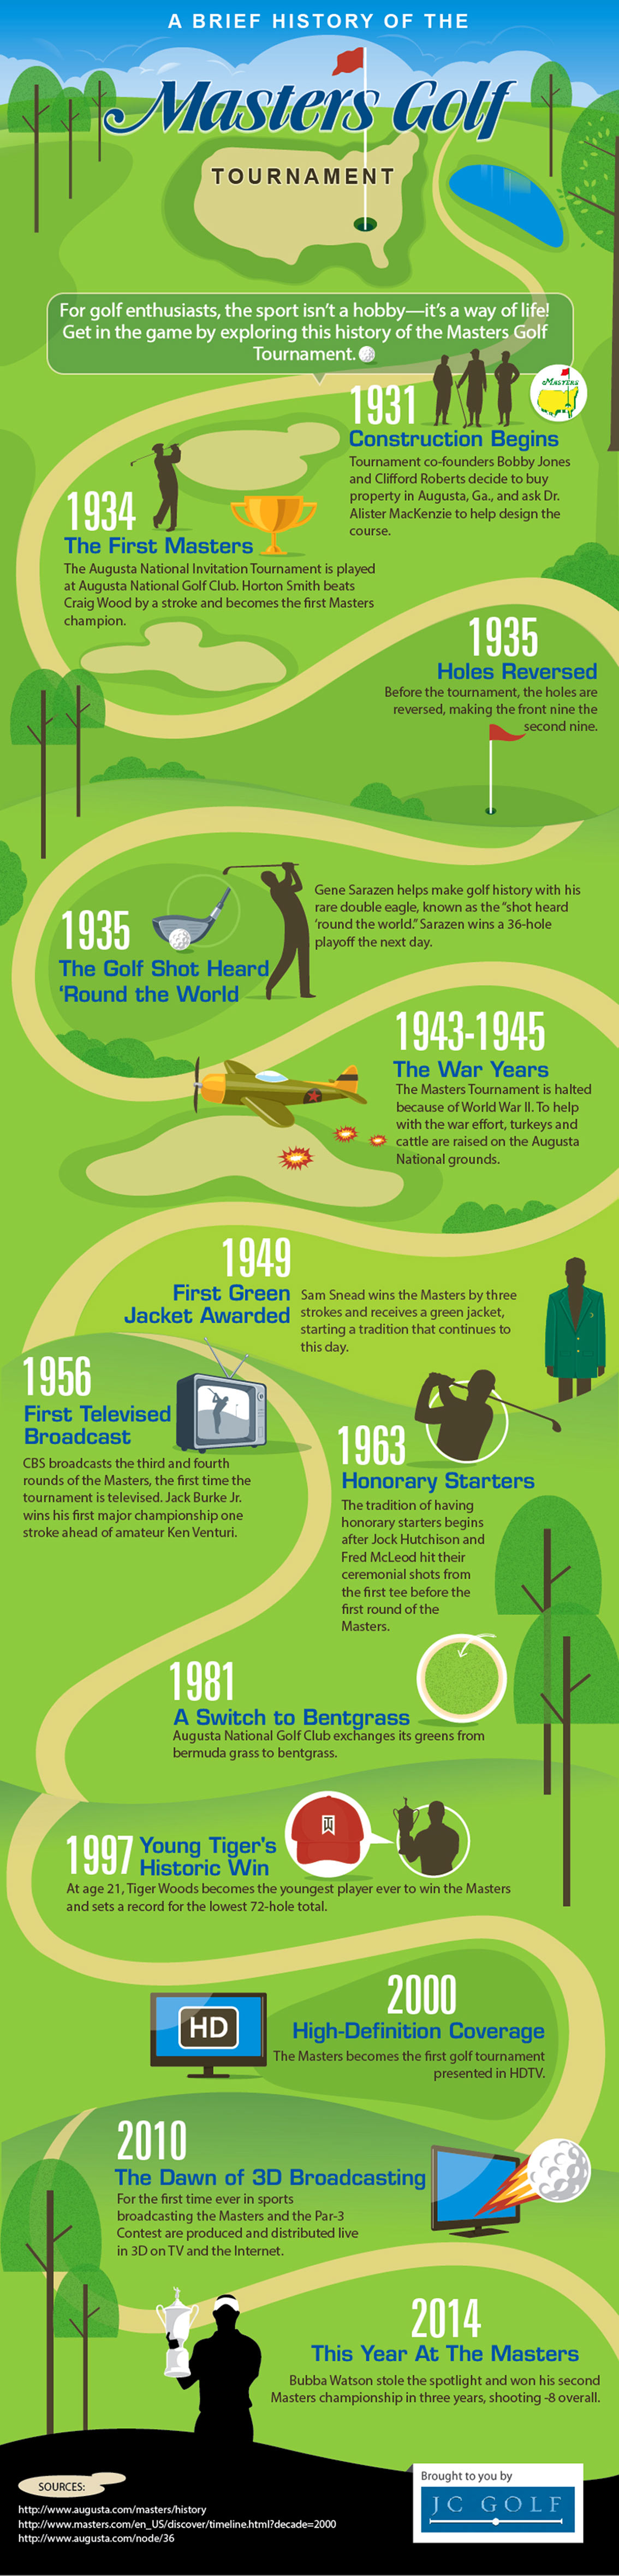 History of the Masters Golf Tournament Infographic